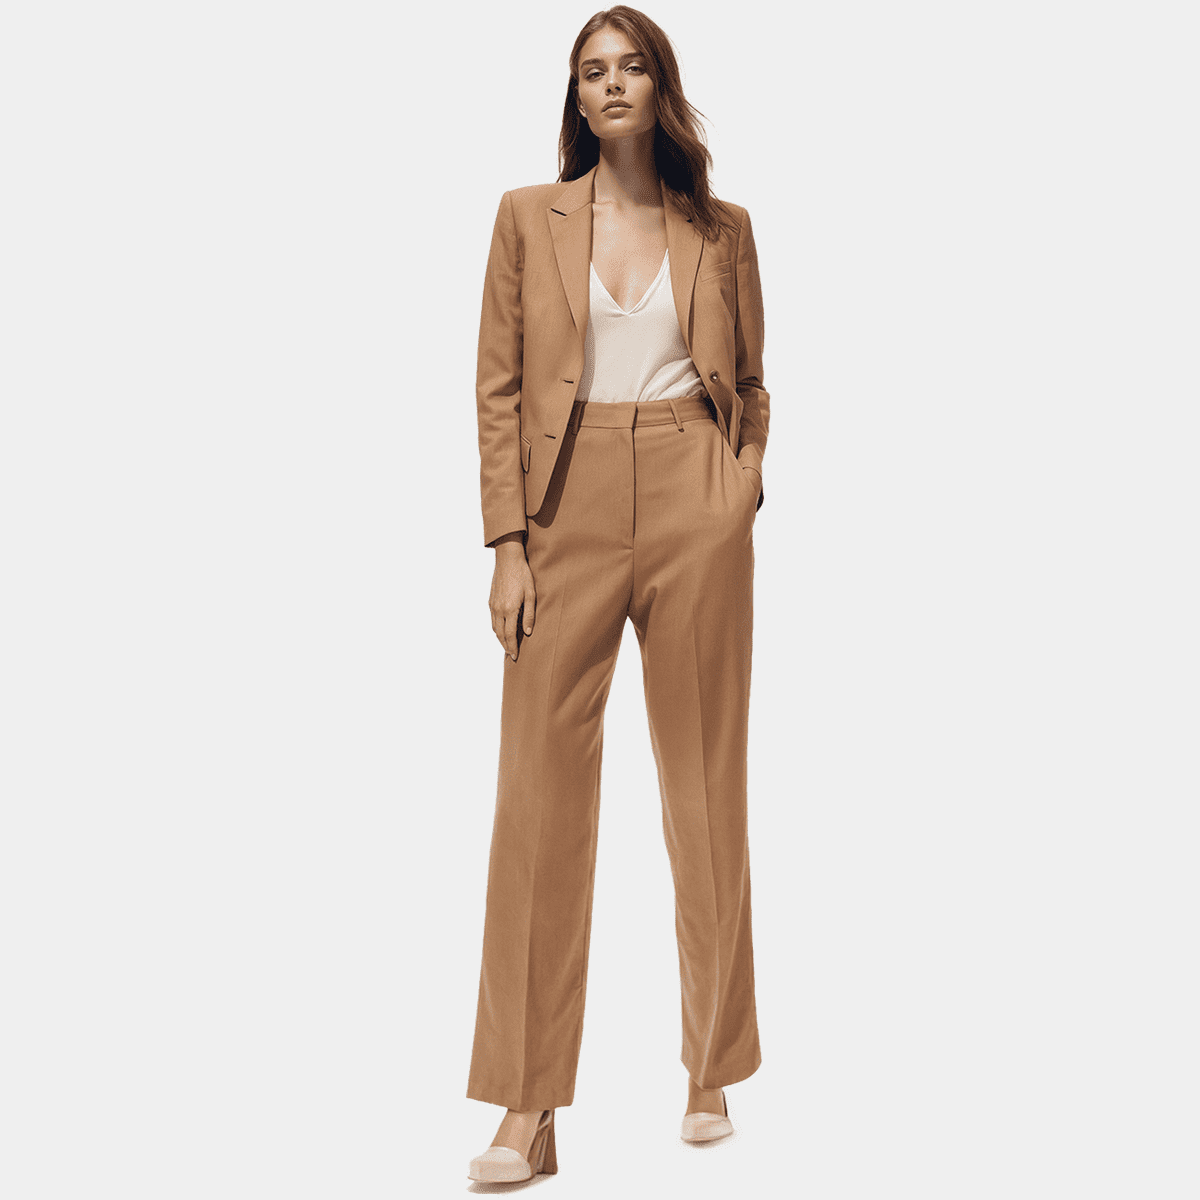 Camel stretch Woman Suit - relaxed fit